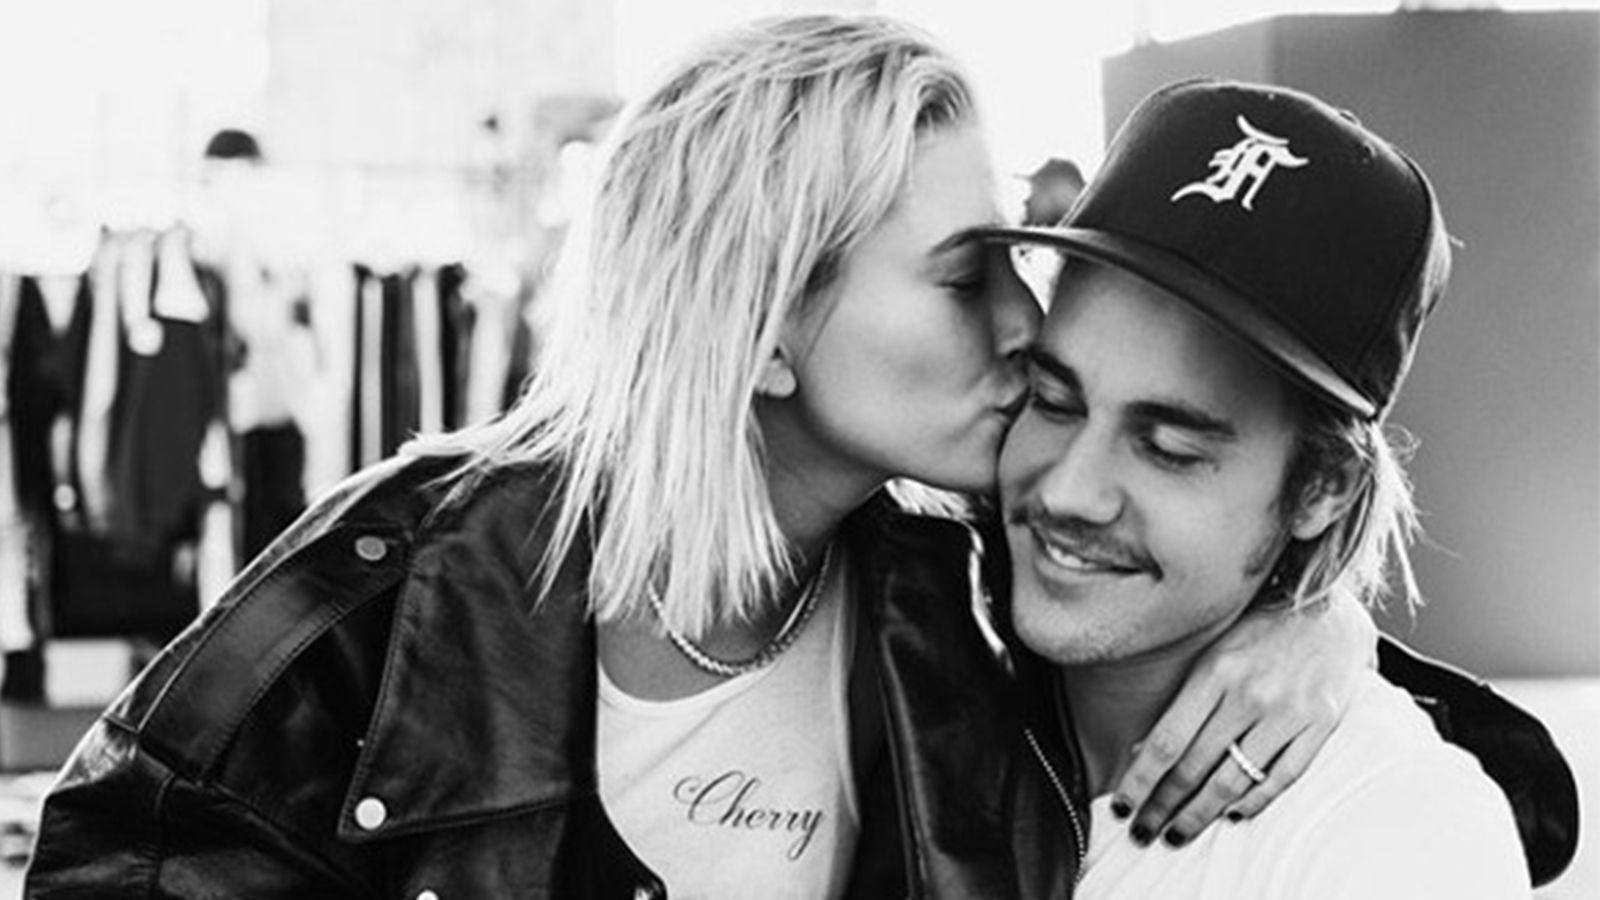 Hailey Baldwin Changes Her Last Name To Bieber On Instagram